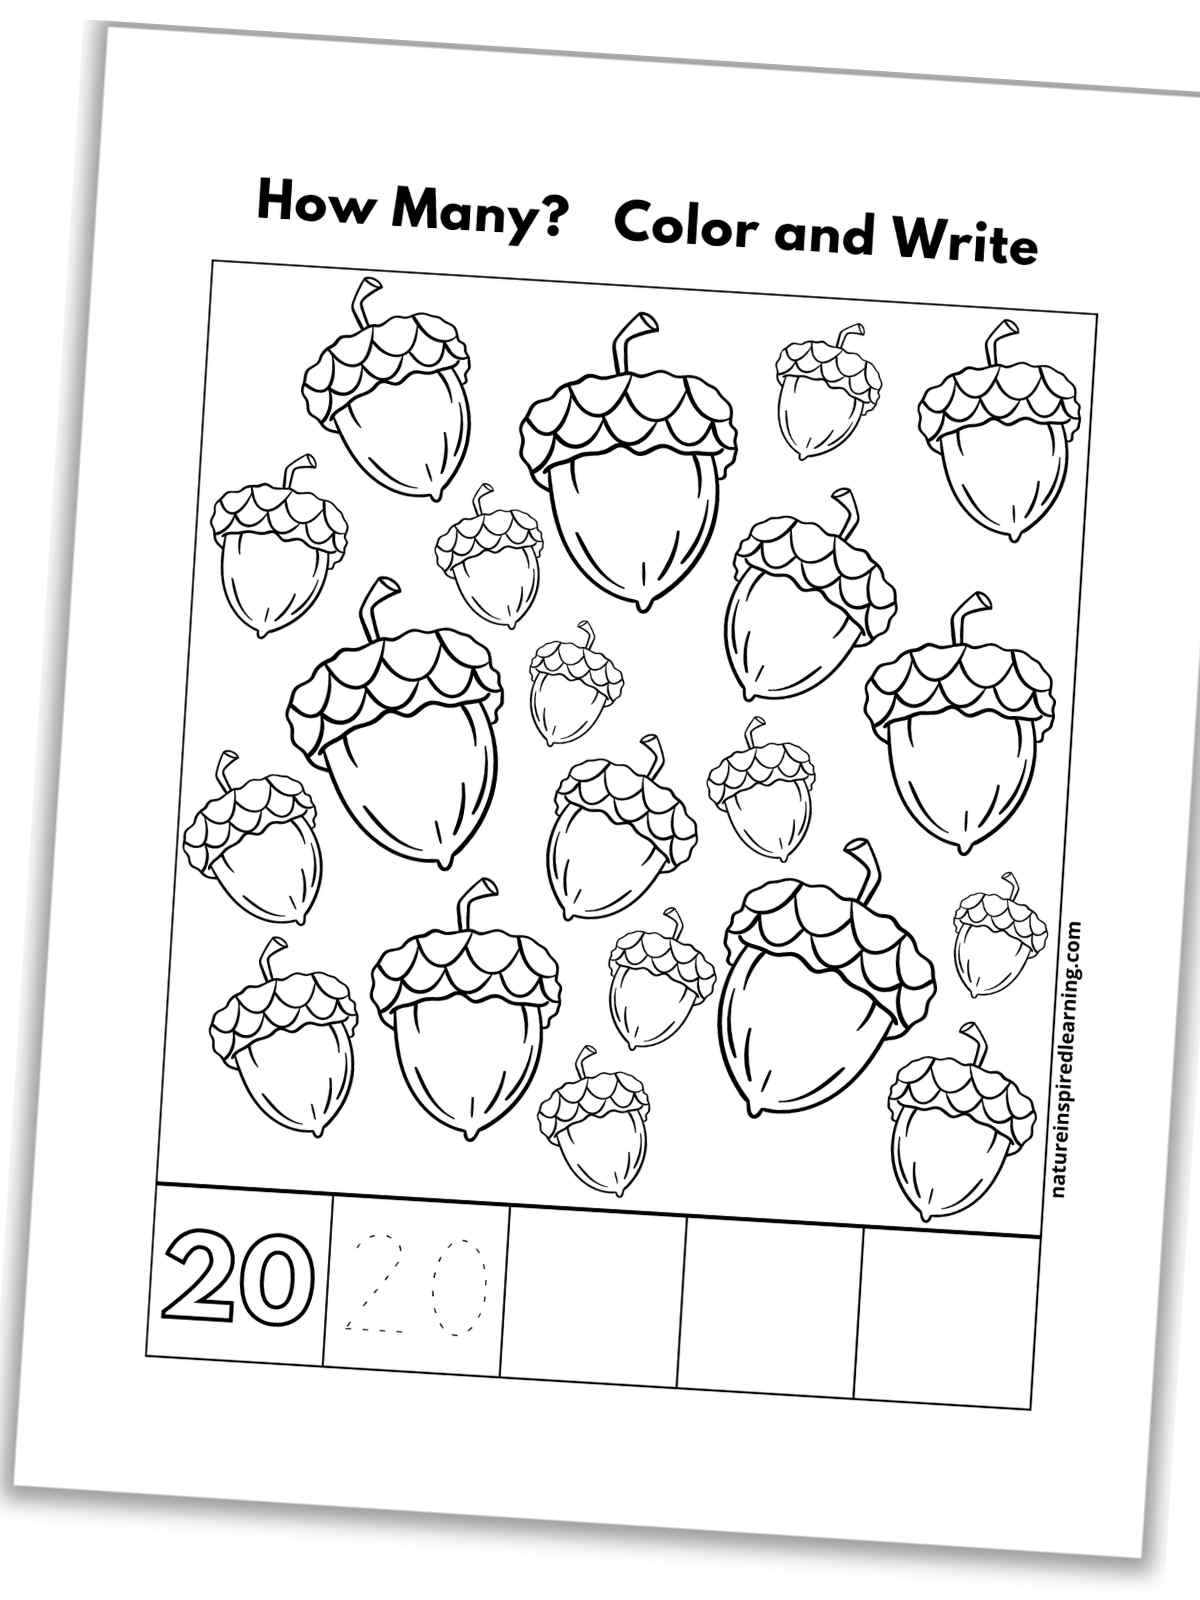 black and white number twenty worksheet with acorns, outline of number 20, a traceable 20, and blank boxes slanted with a drop shadow